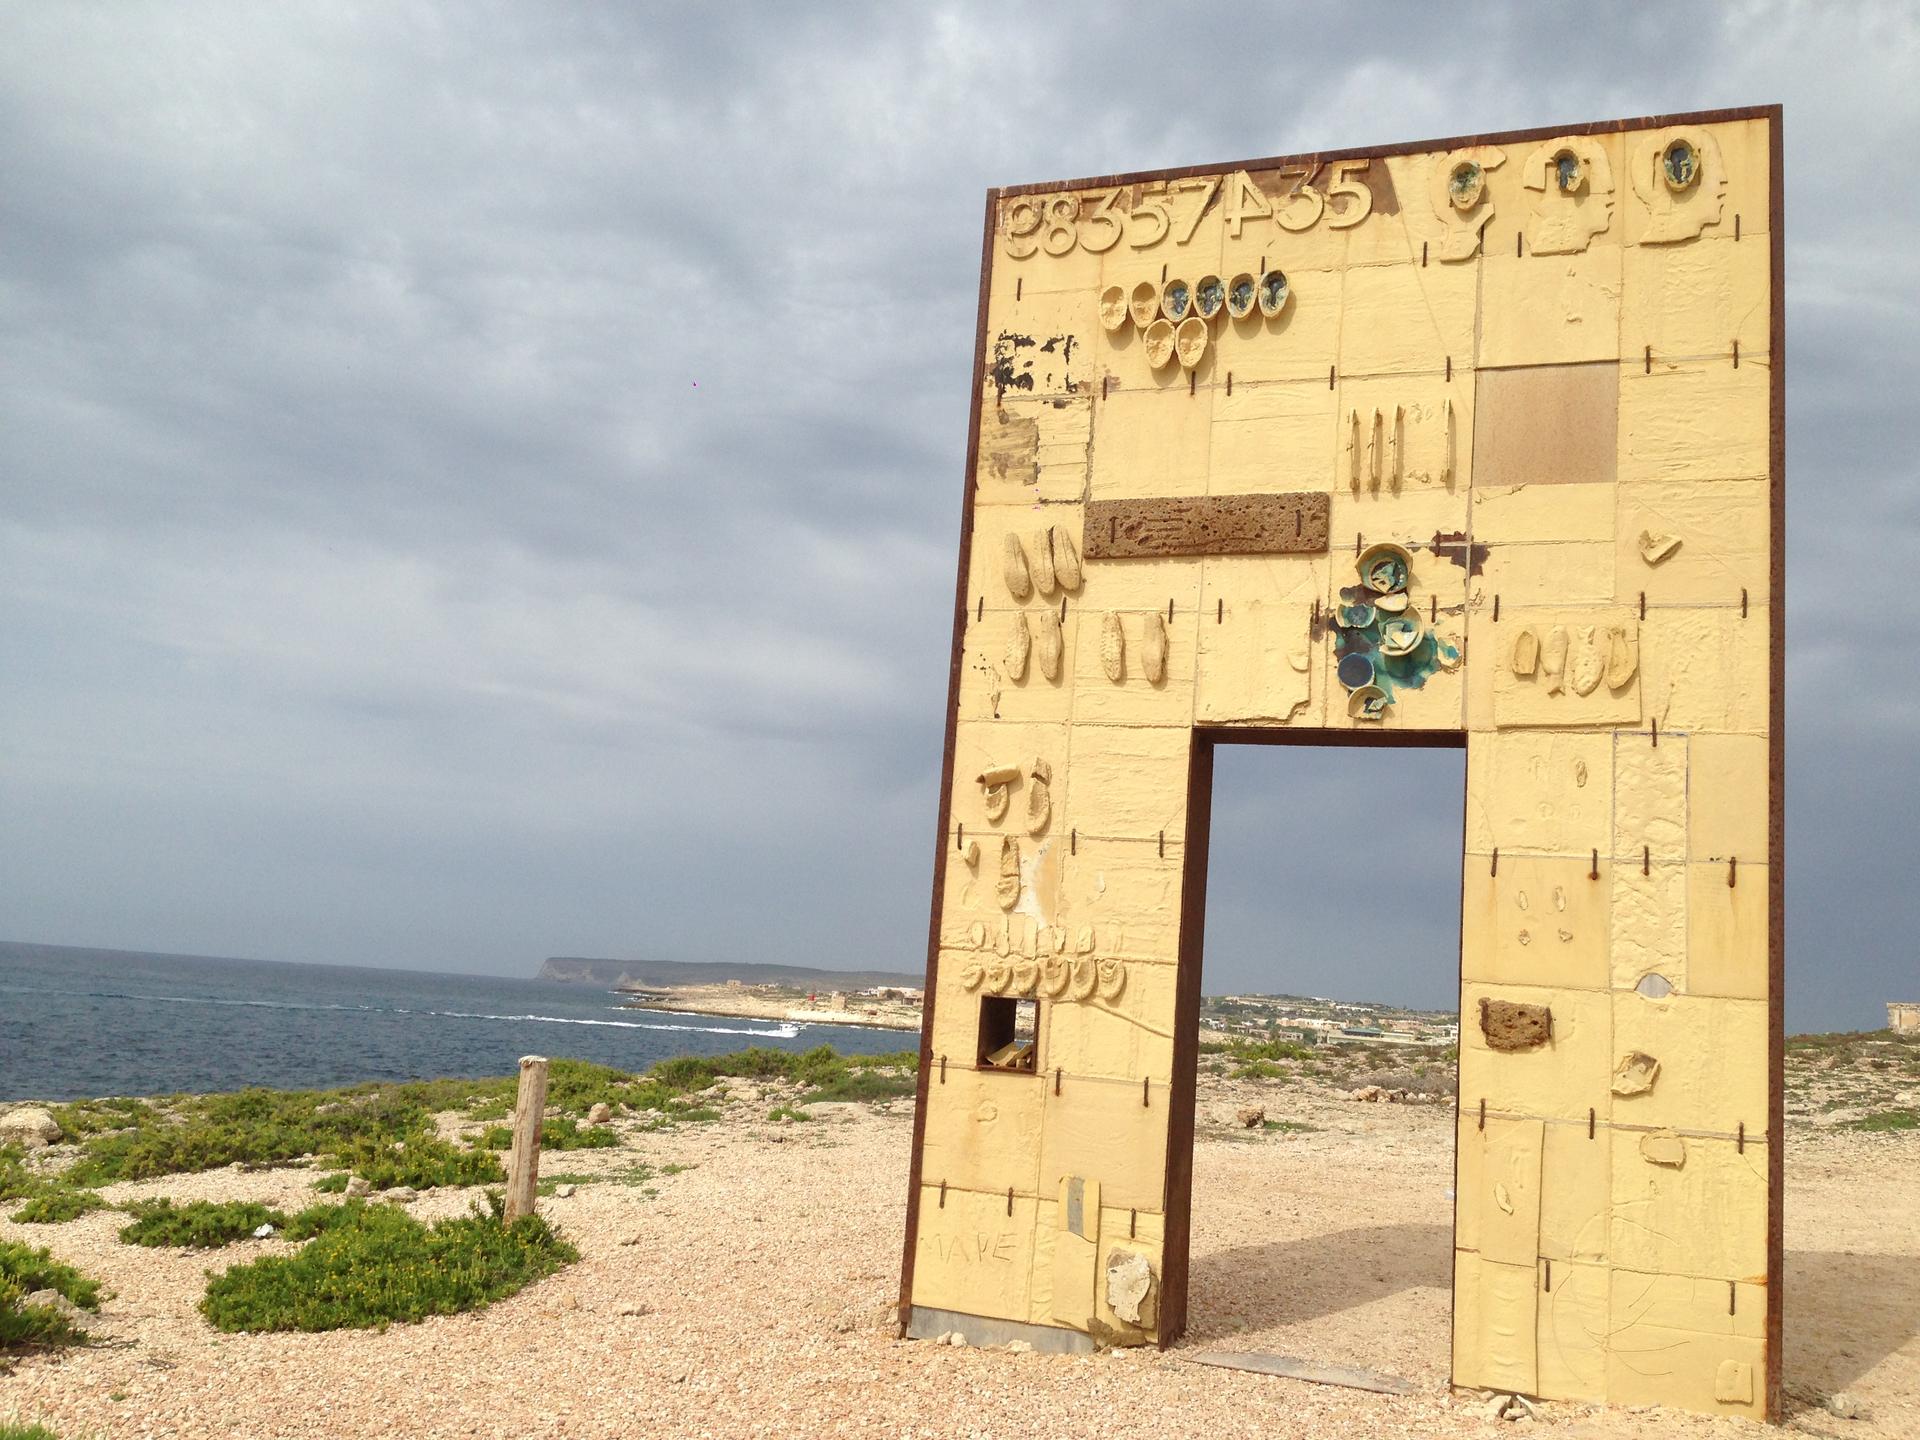 "The Door of Lampedusa, Door of Europe" underscores the situation of refugees who arrive on Lampedusa as the entry point to the rest of Europe.